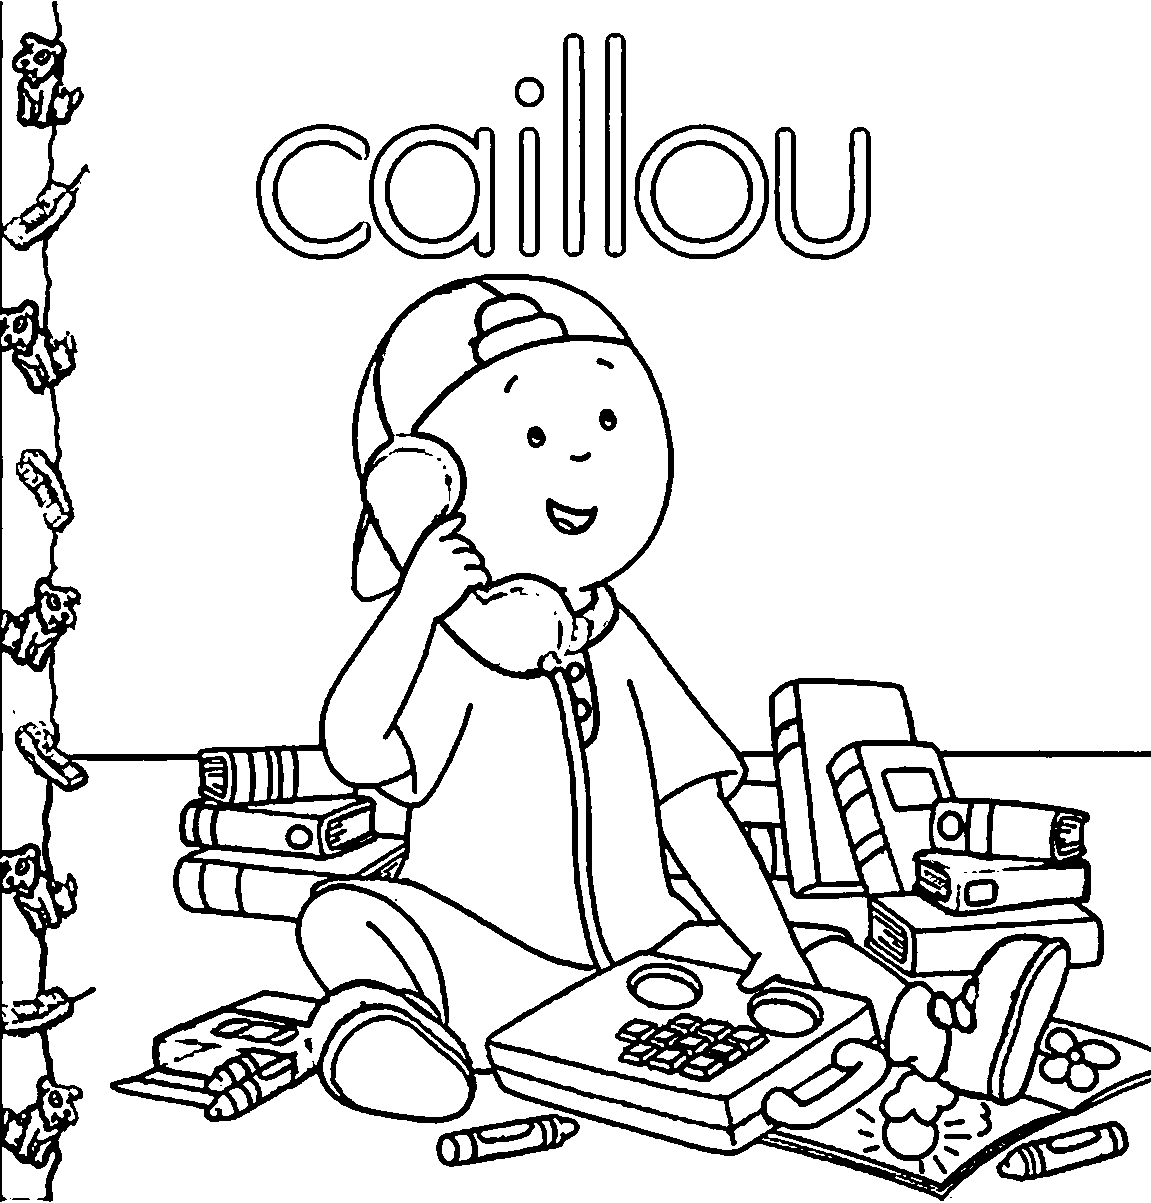 printable caillou coloring pages Coloring22free - Coloring22Free.com